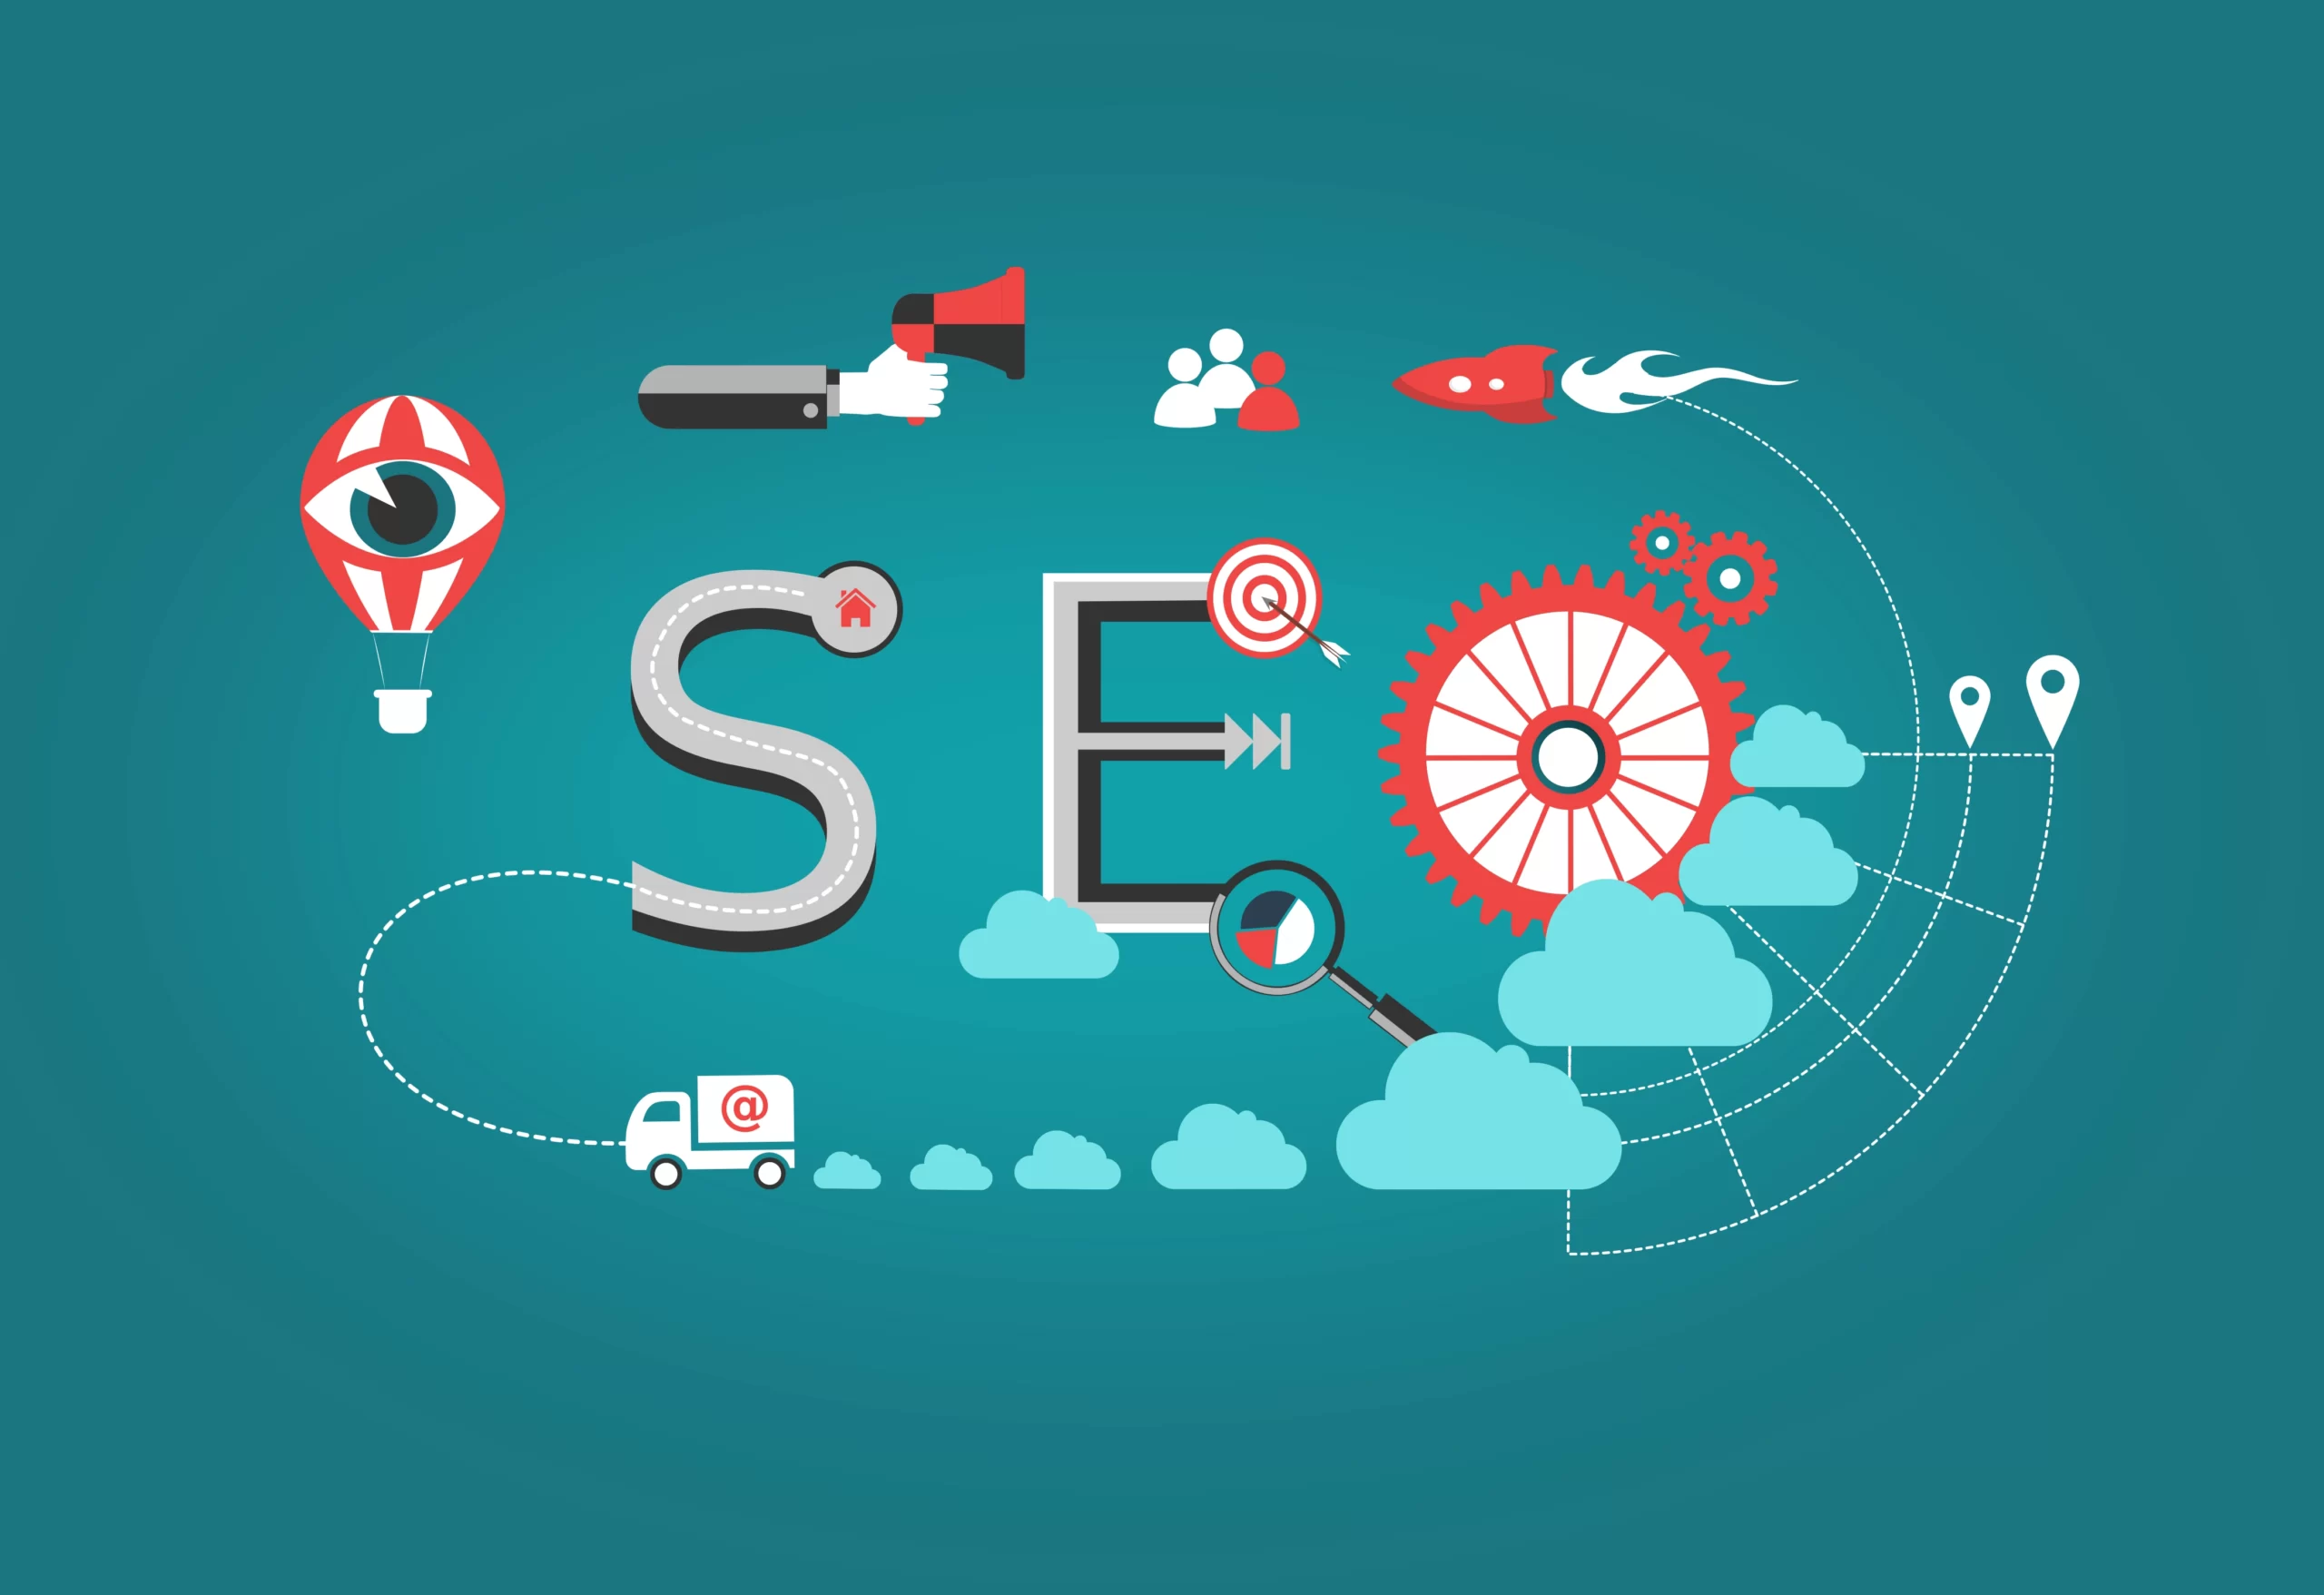 3 Key Components of SEO To Master Today